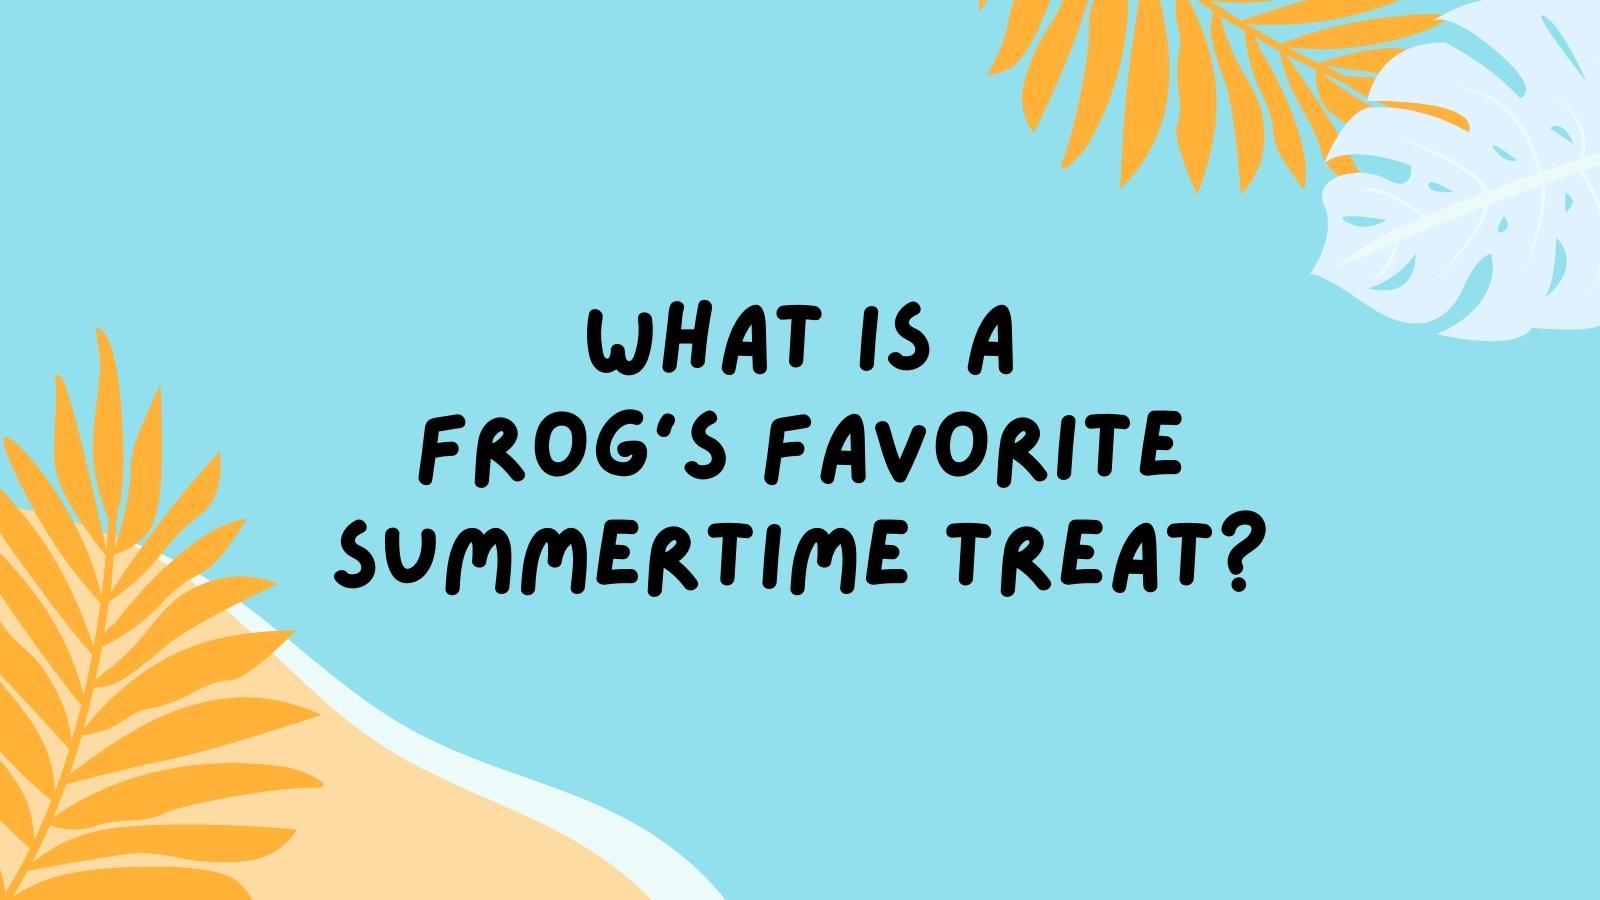 What is a frog's favorite summertime treat?